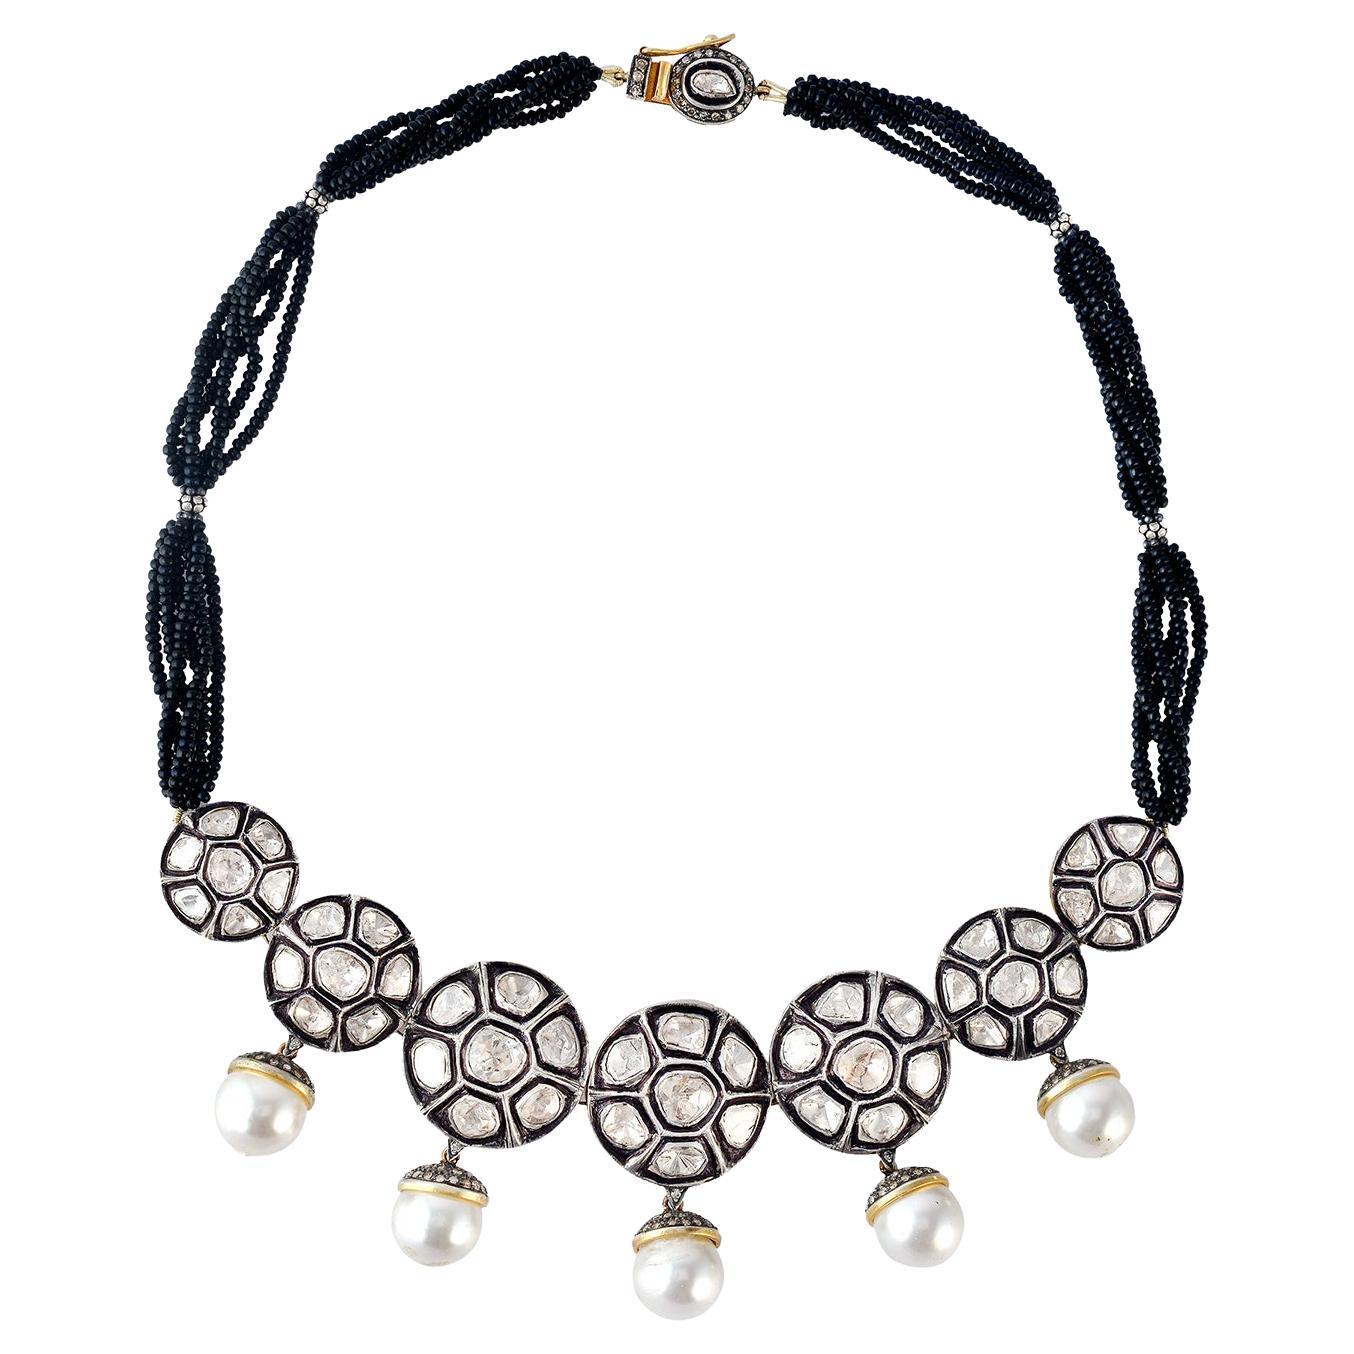 Polki Diamond & Pearl Necklace with Black Onyx Made in Gold & Silver